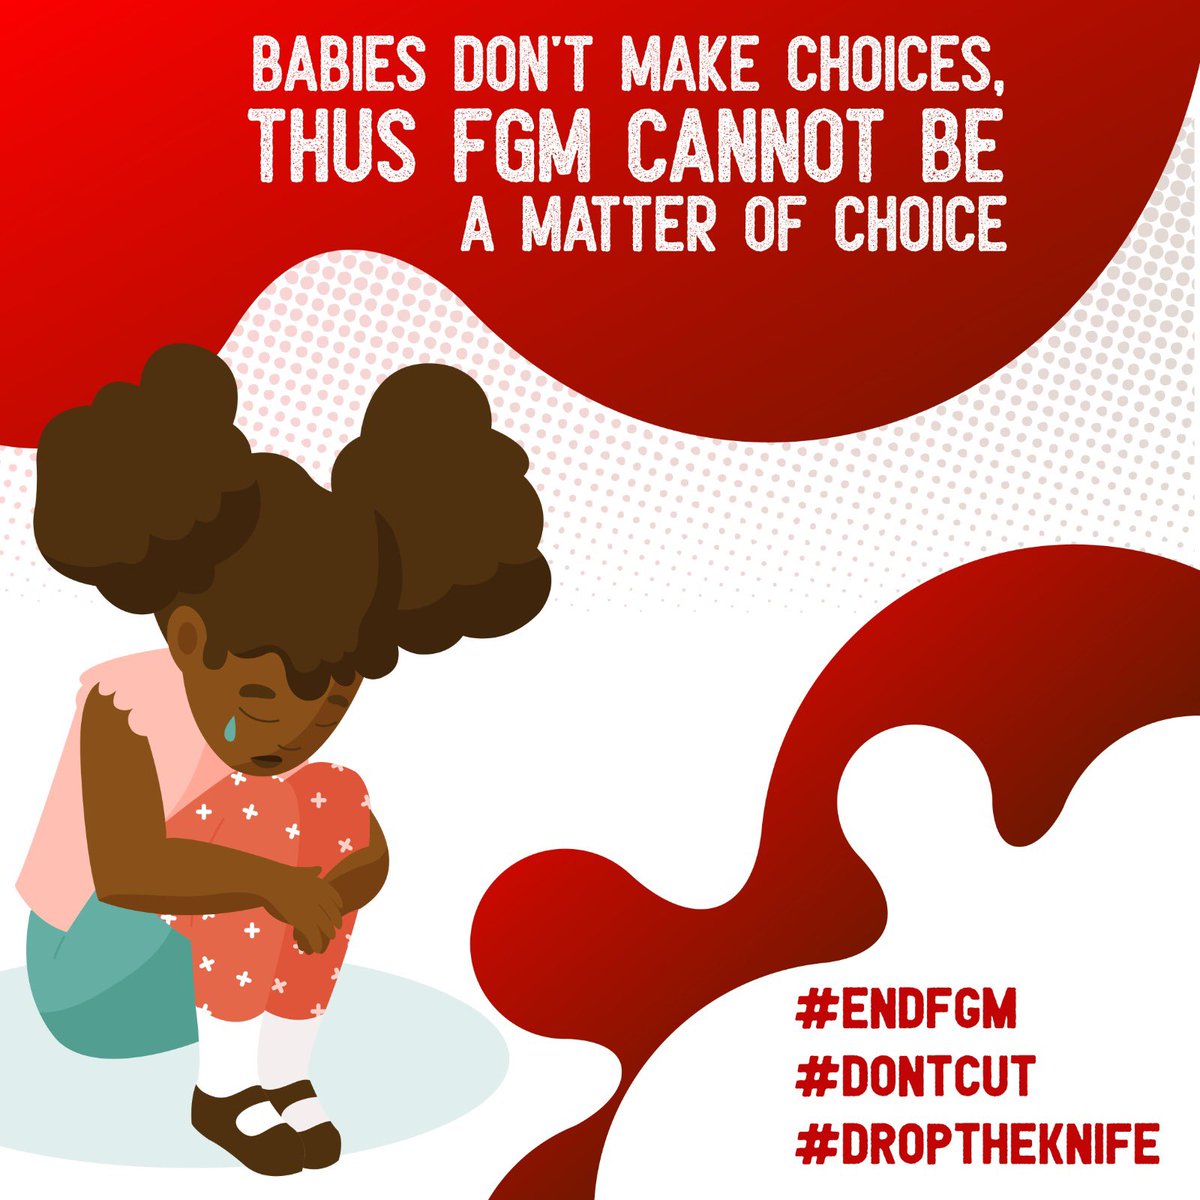 Ending FGM means  creating a safe environment for our women and girls. Enjoy these graphics from our #EndFGM campaign, learn, unlearn and share. 

#EndFGM
#EndFGM220
#EndFGMNow